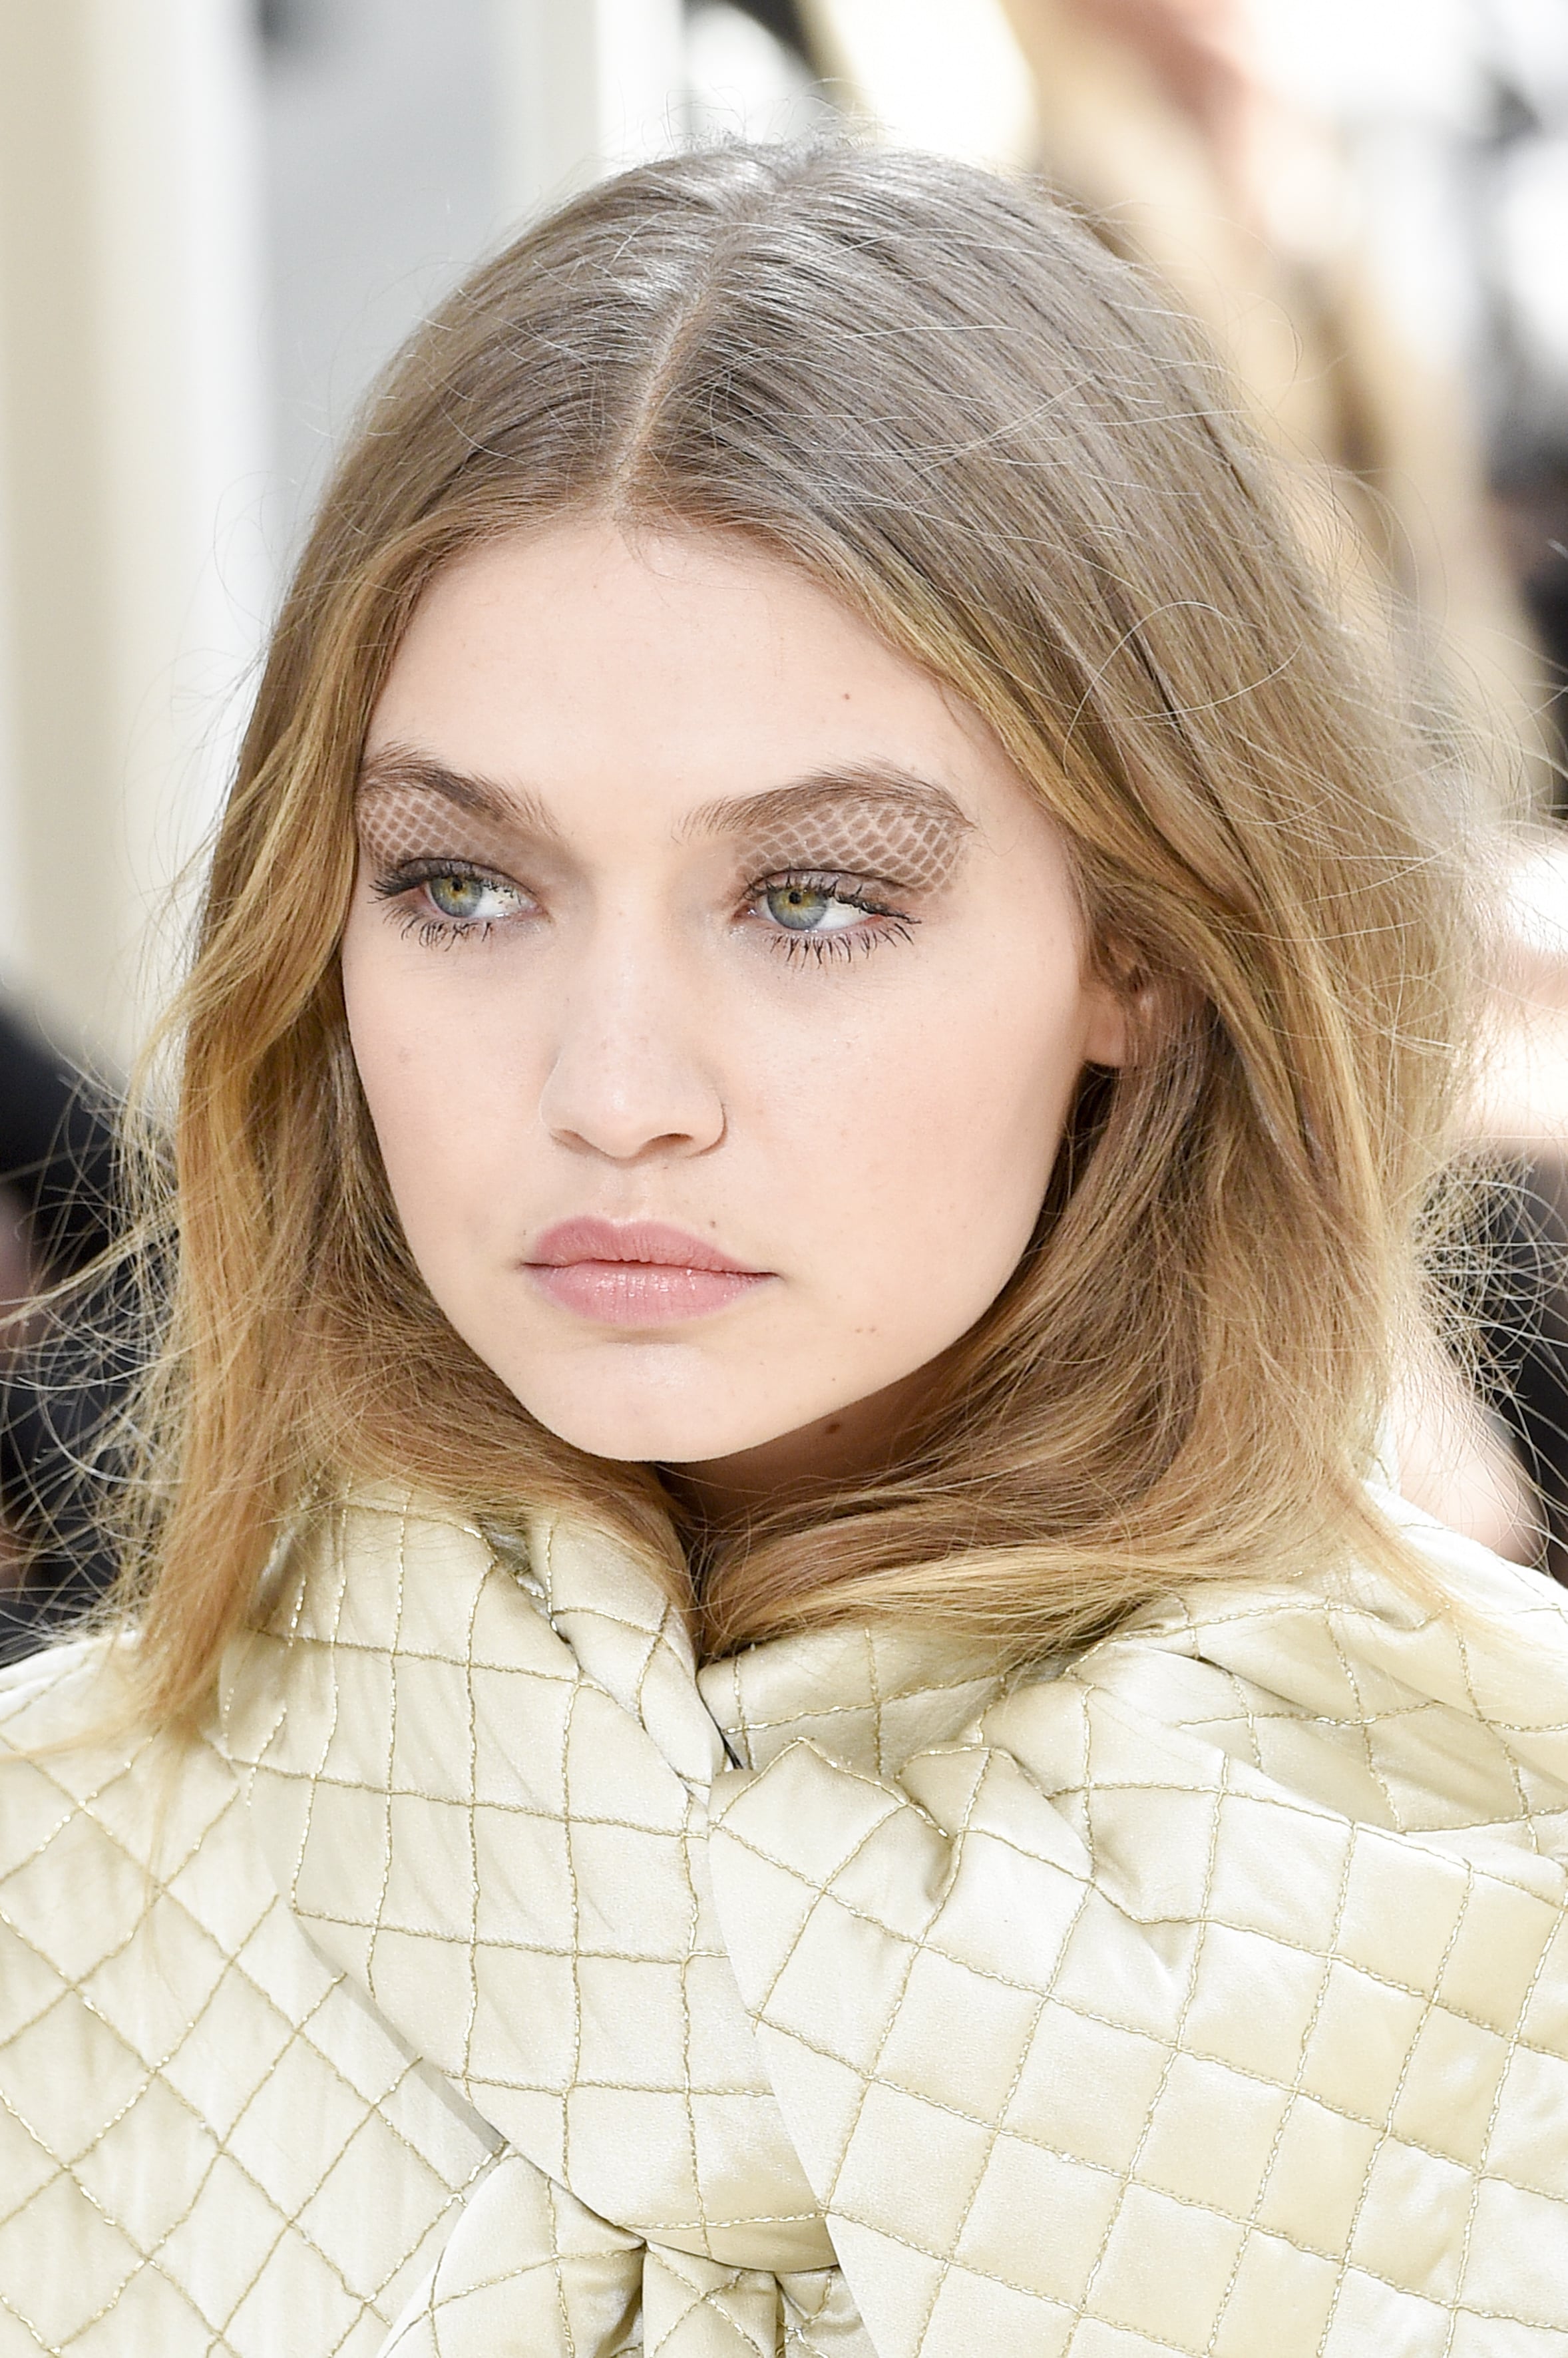 This Is The Makeup Version Of Chanel's Iconic Tweed Jacket